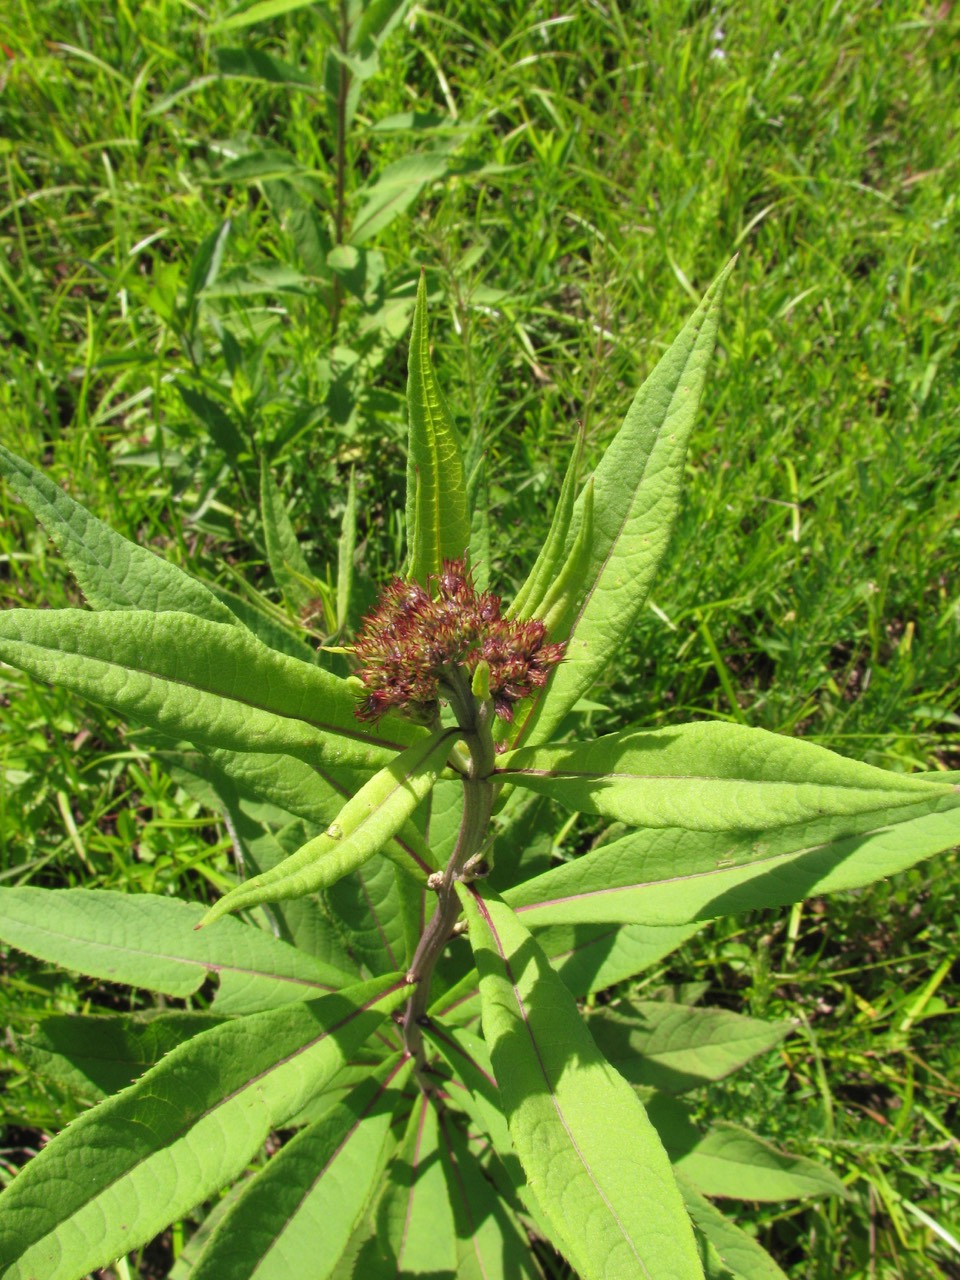 The Scientific Name is Vernonia noveboracensis. You will likely hear them called New York Ironweed. This picture shows the In late spring with flower buds of Vernonia noveboracensis